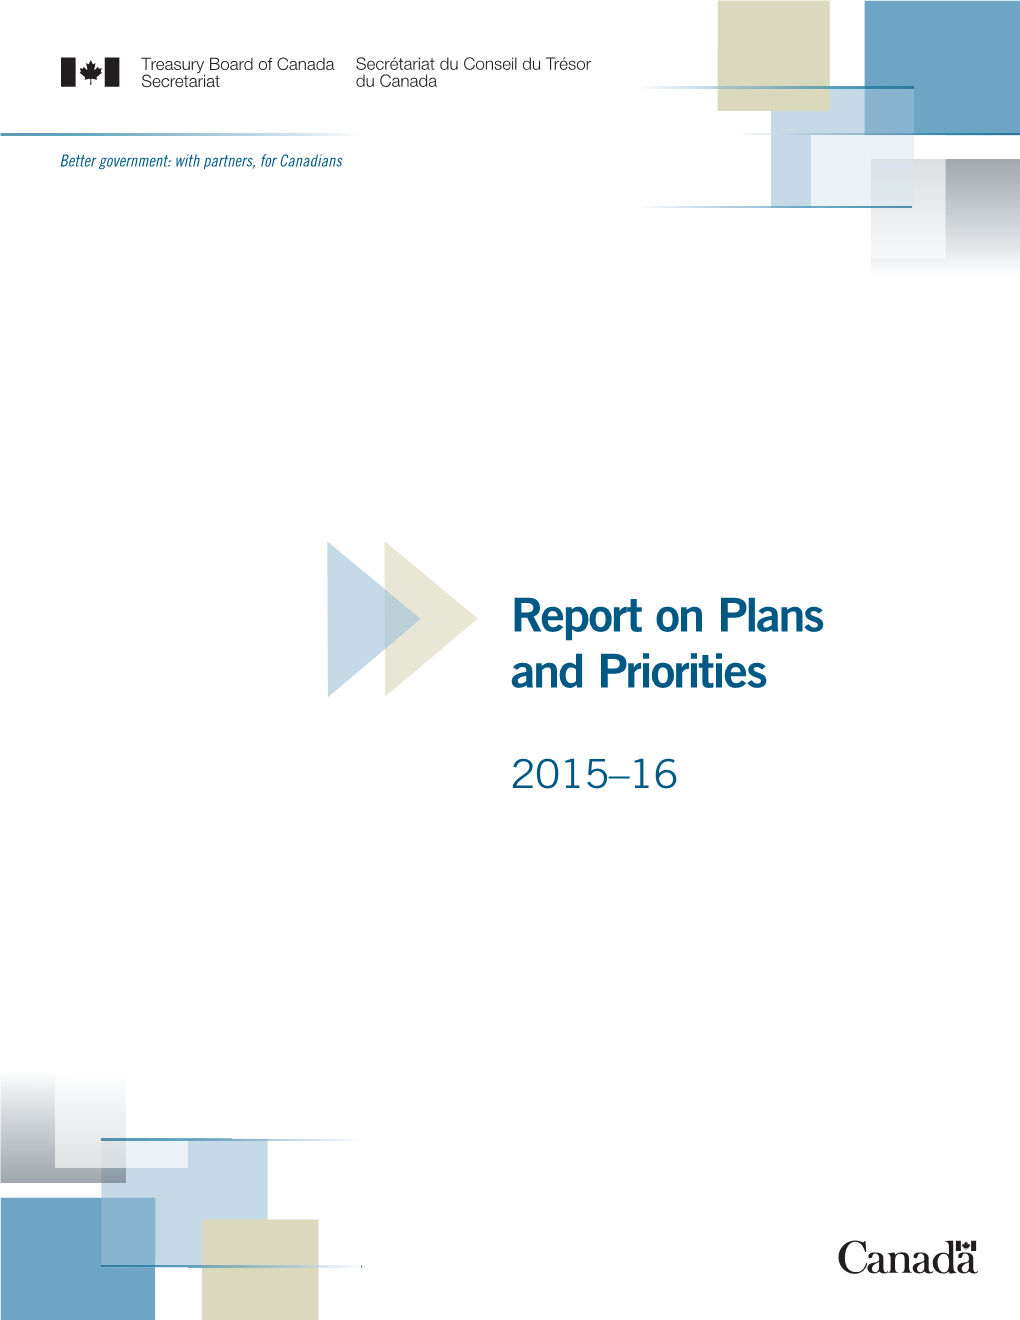 TBS Report on Plans and Priorities 2015-16